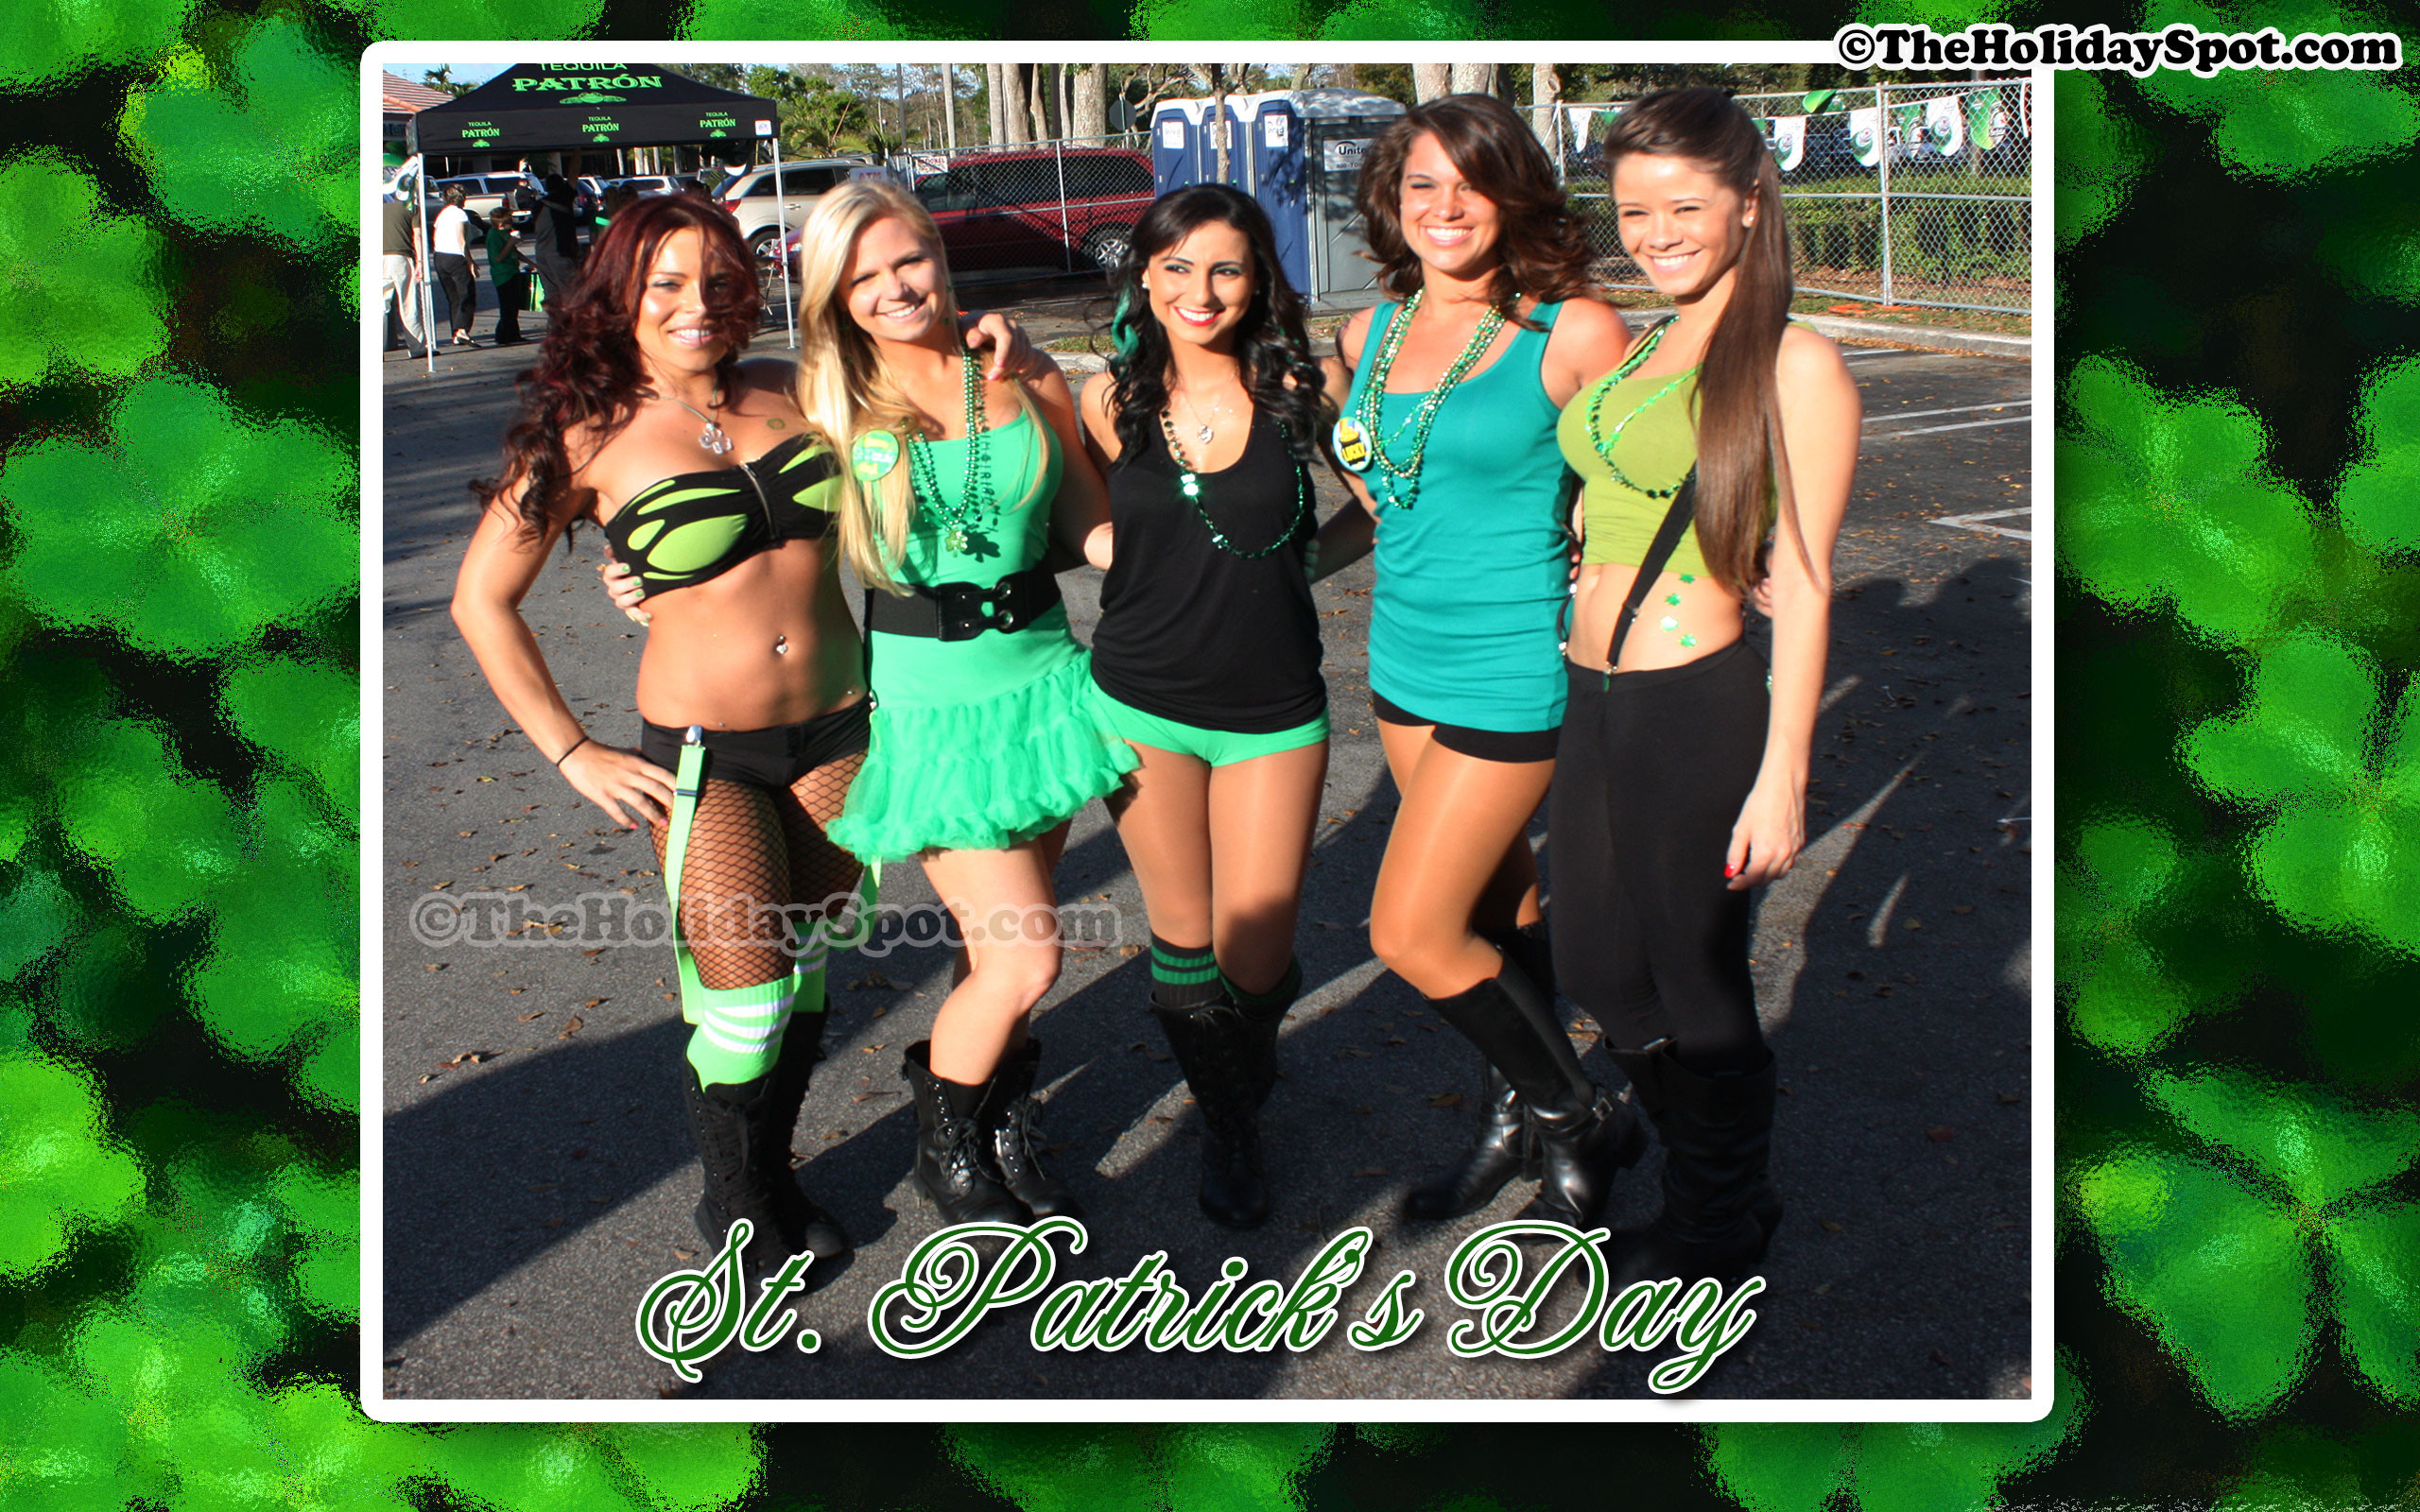 2560x1600 St. Patrick's Day wallpaper with the flavour of green with charming girls